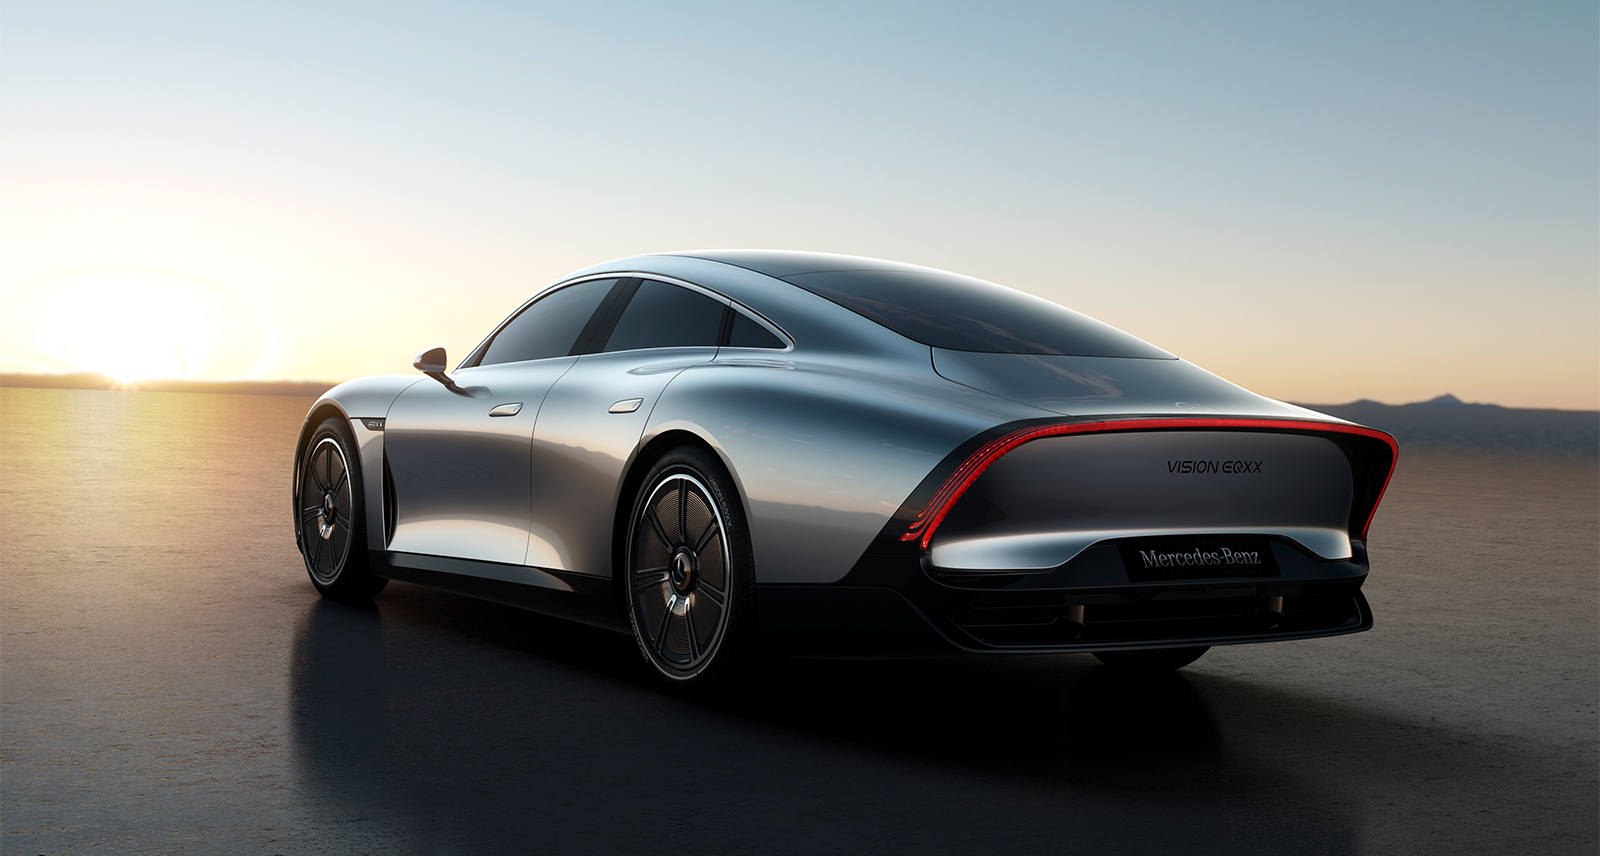 The 1,000 Km Mercedes-Benz Vision EQXX Concept Puts Tesla and Everyone Else on Notice